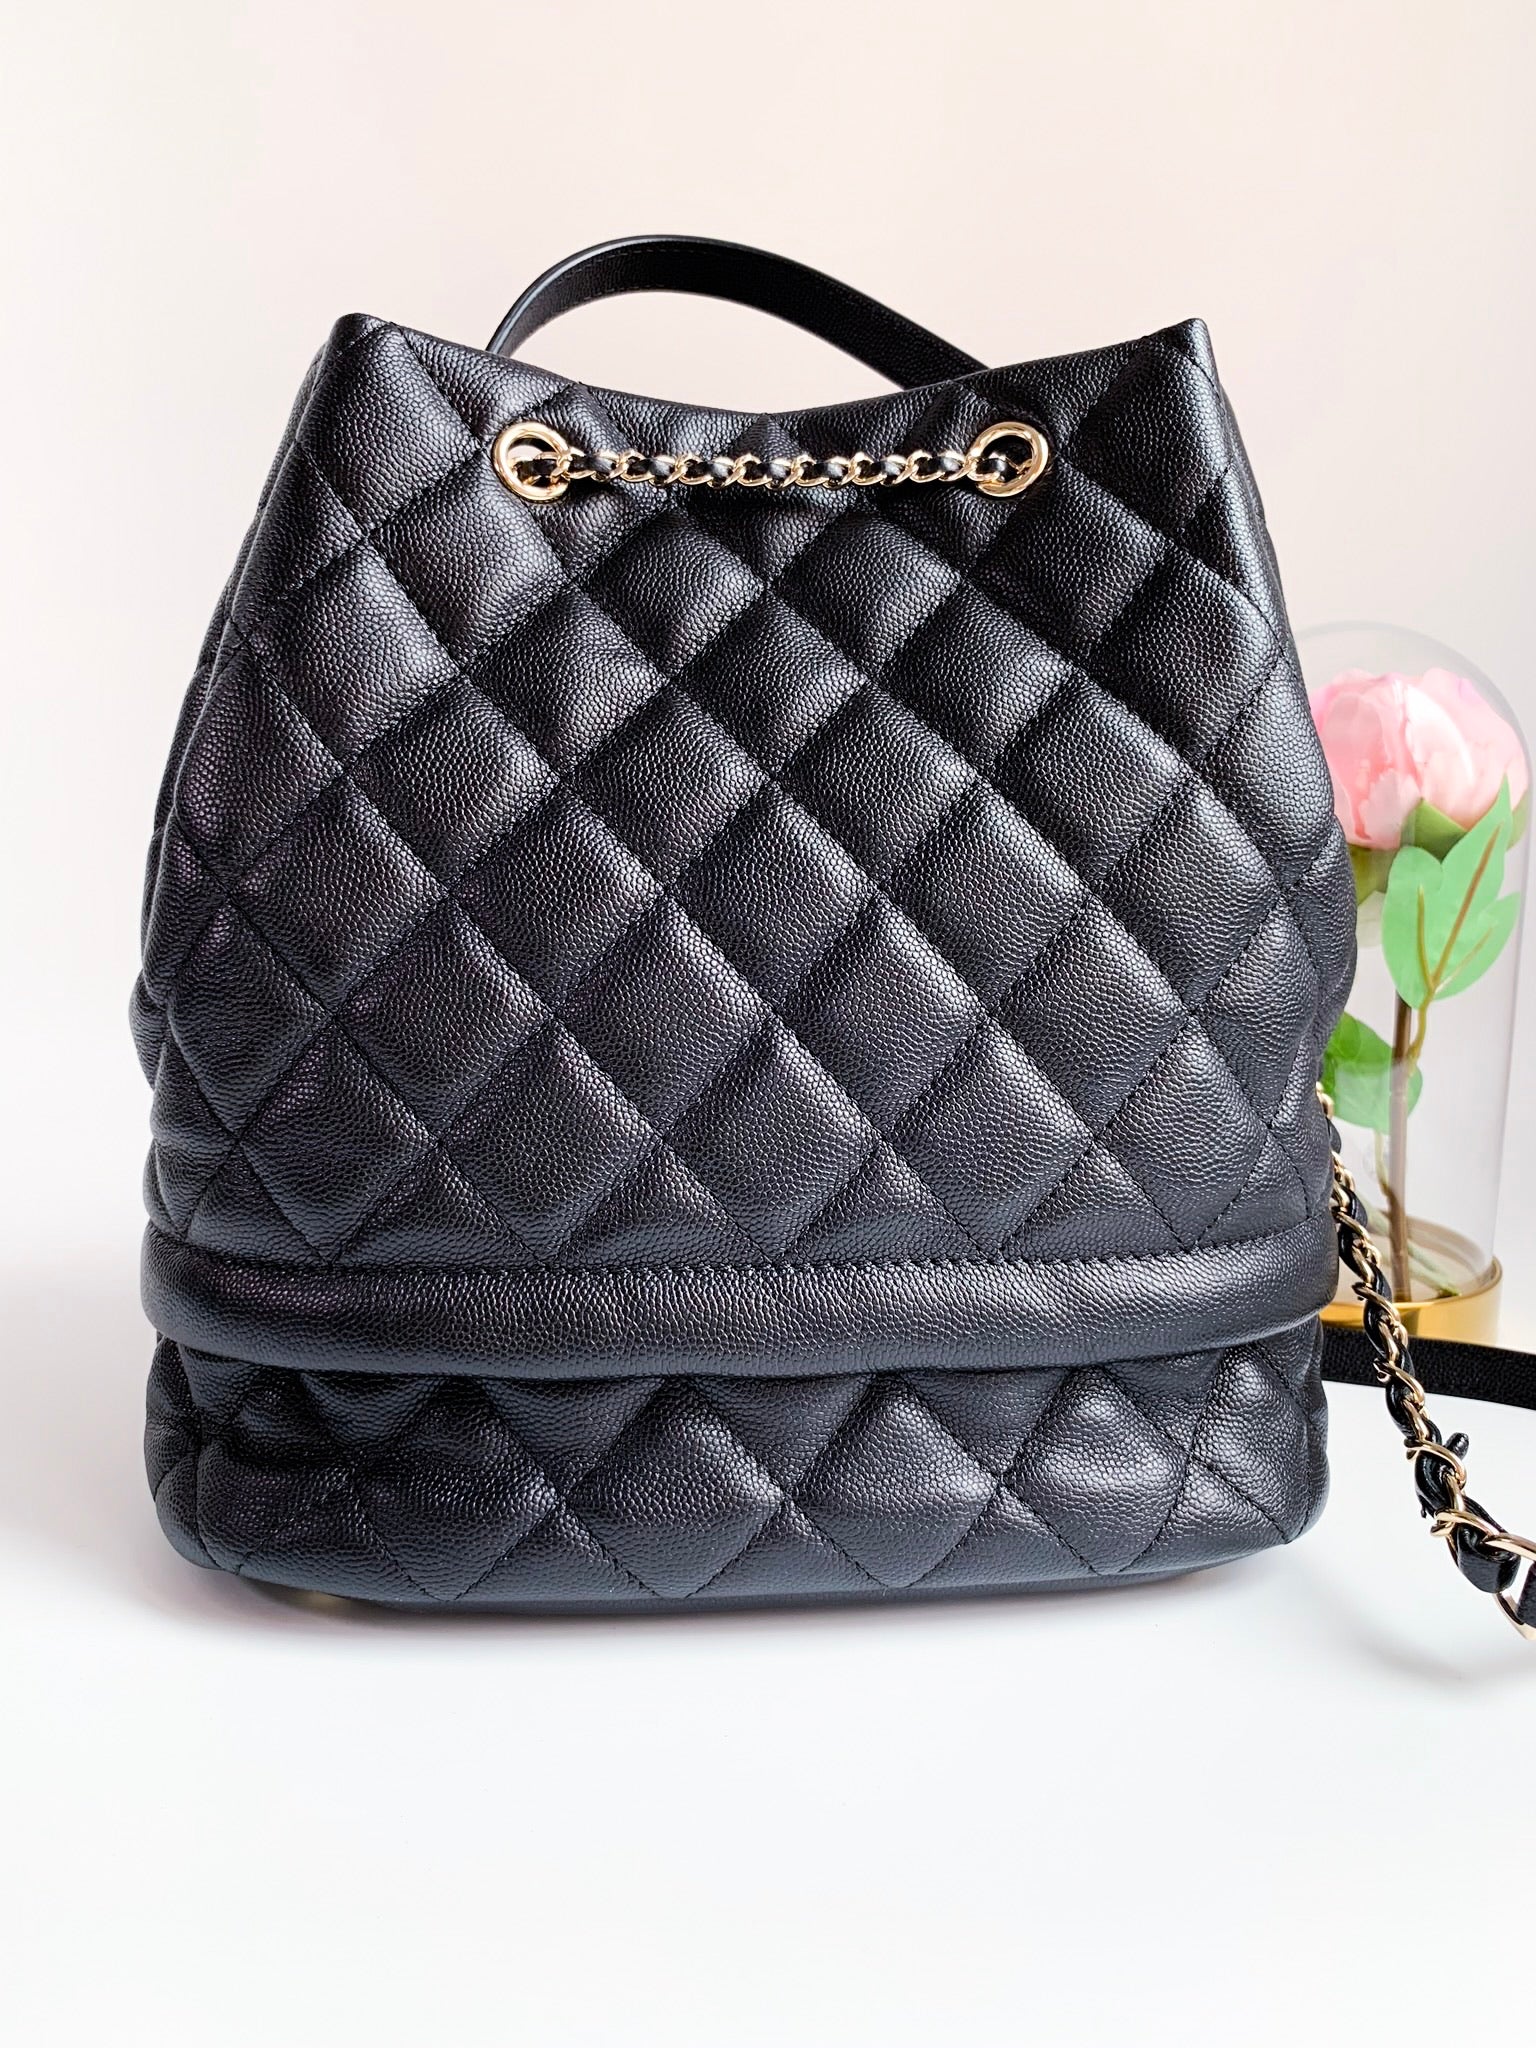 CHANEL Caviar Quilted Rolled Up Bucket Drawstring Bag Navy 476758